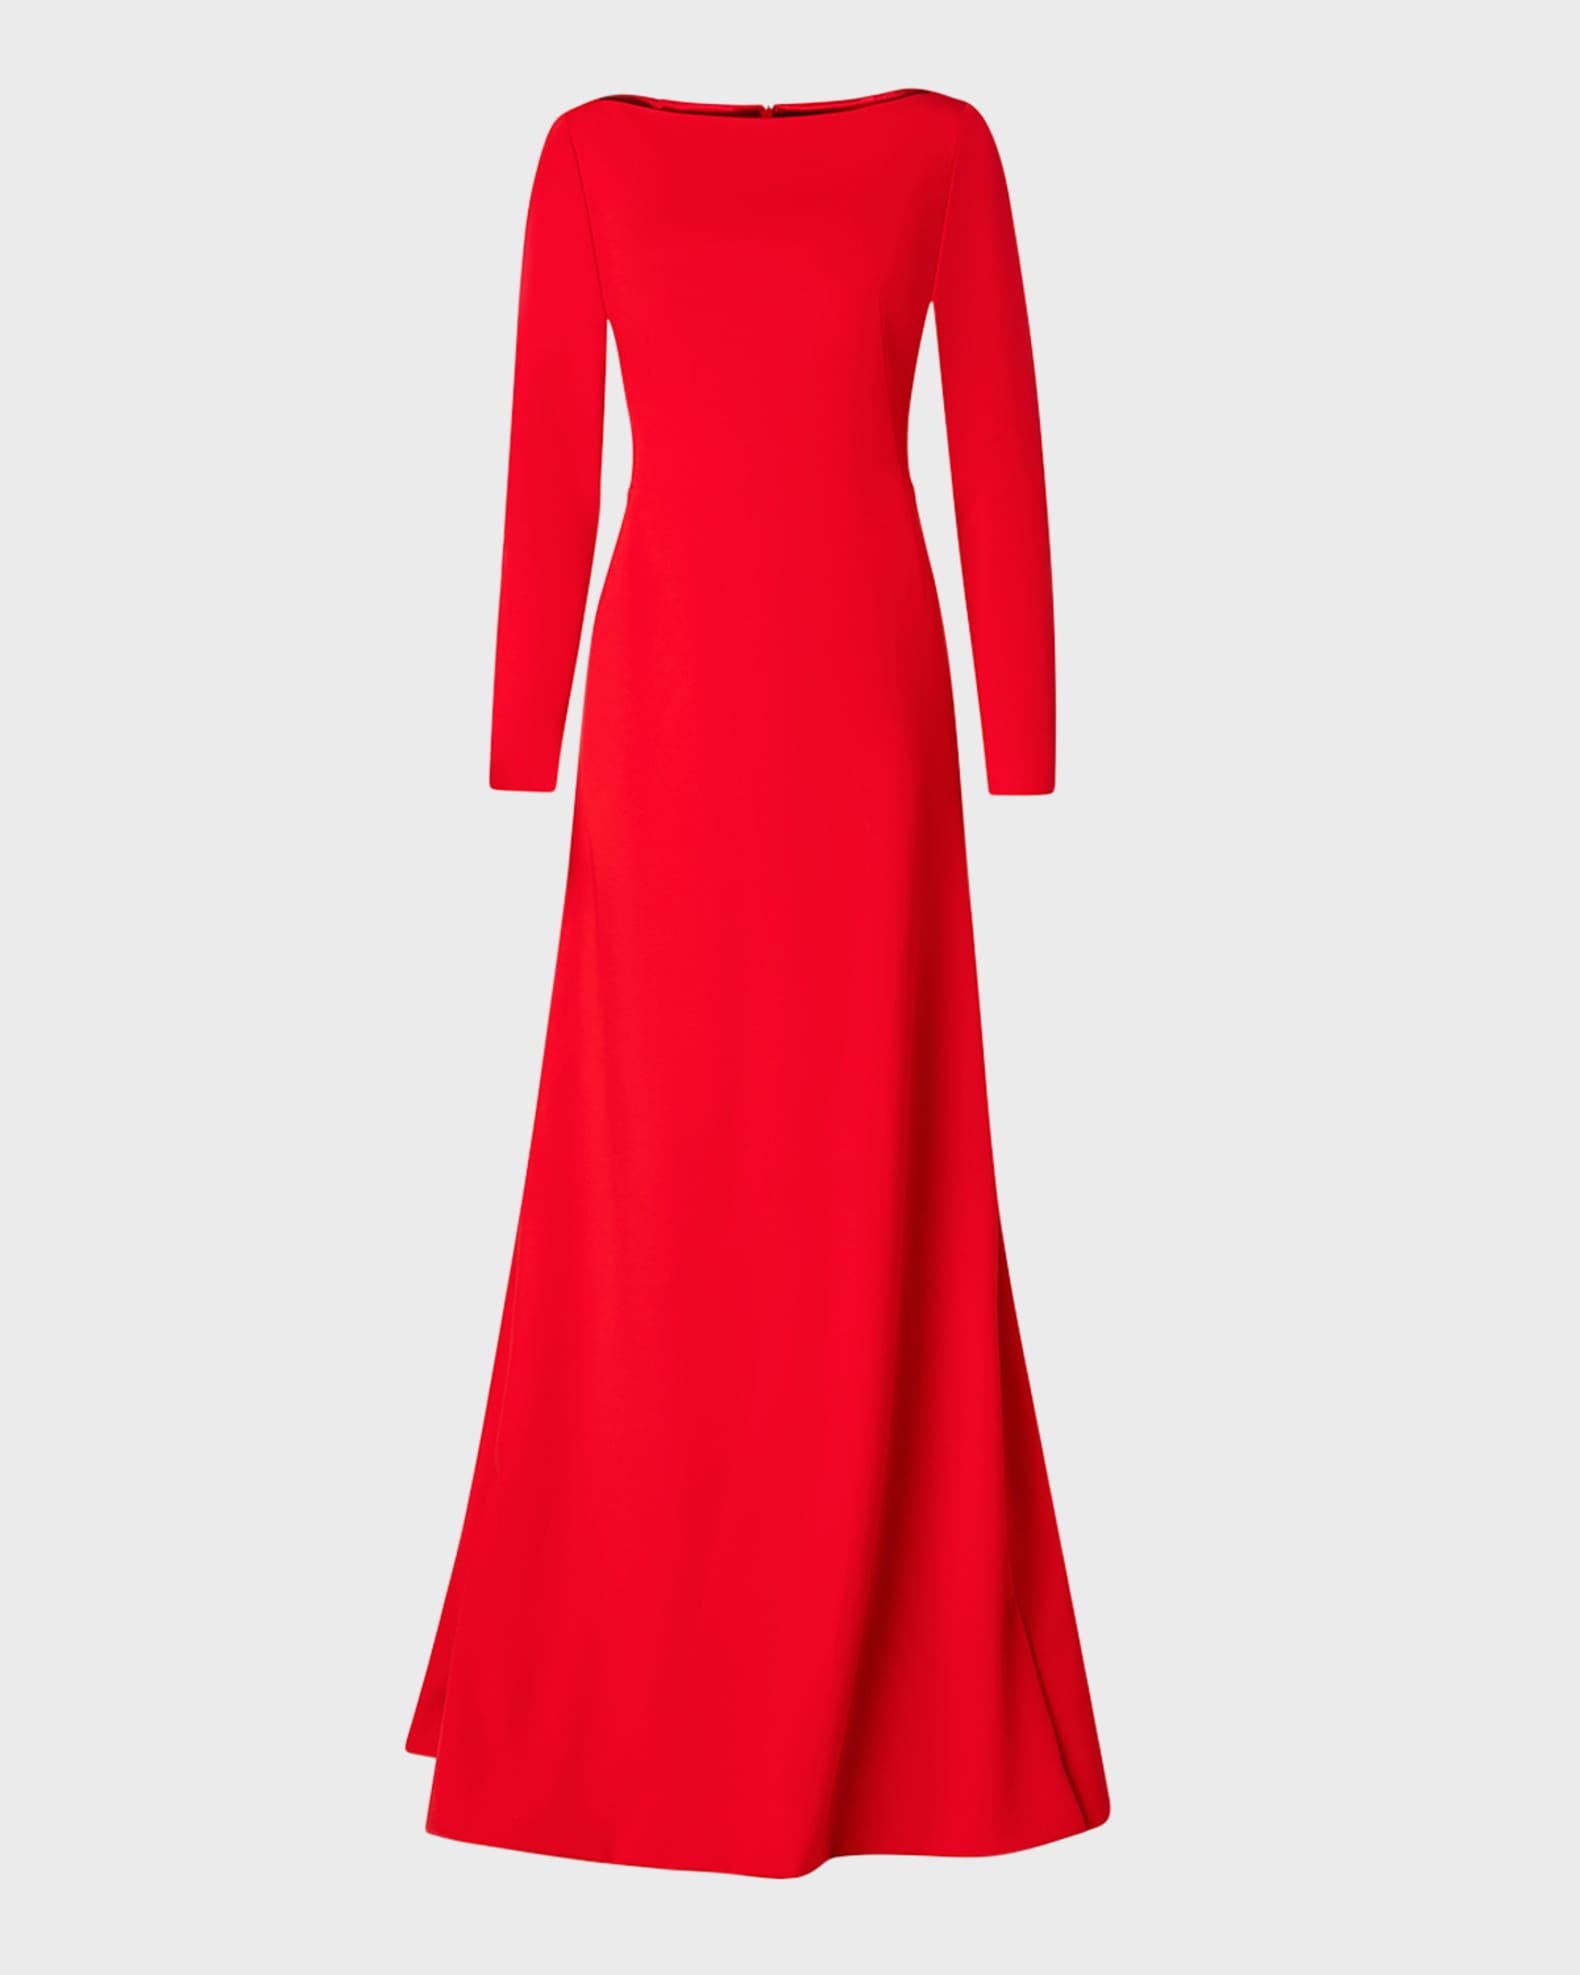 Akris Red Long-Sleeve Godet Back Gown | Neiman Marcus